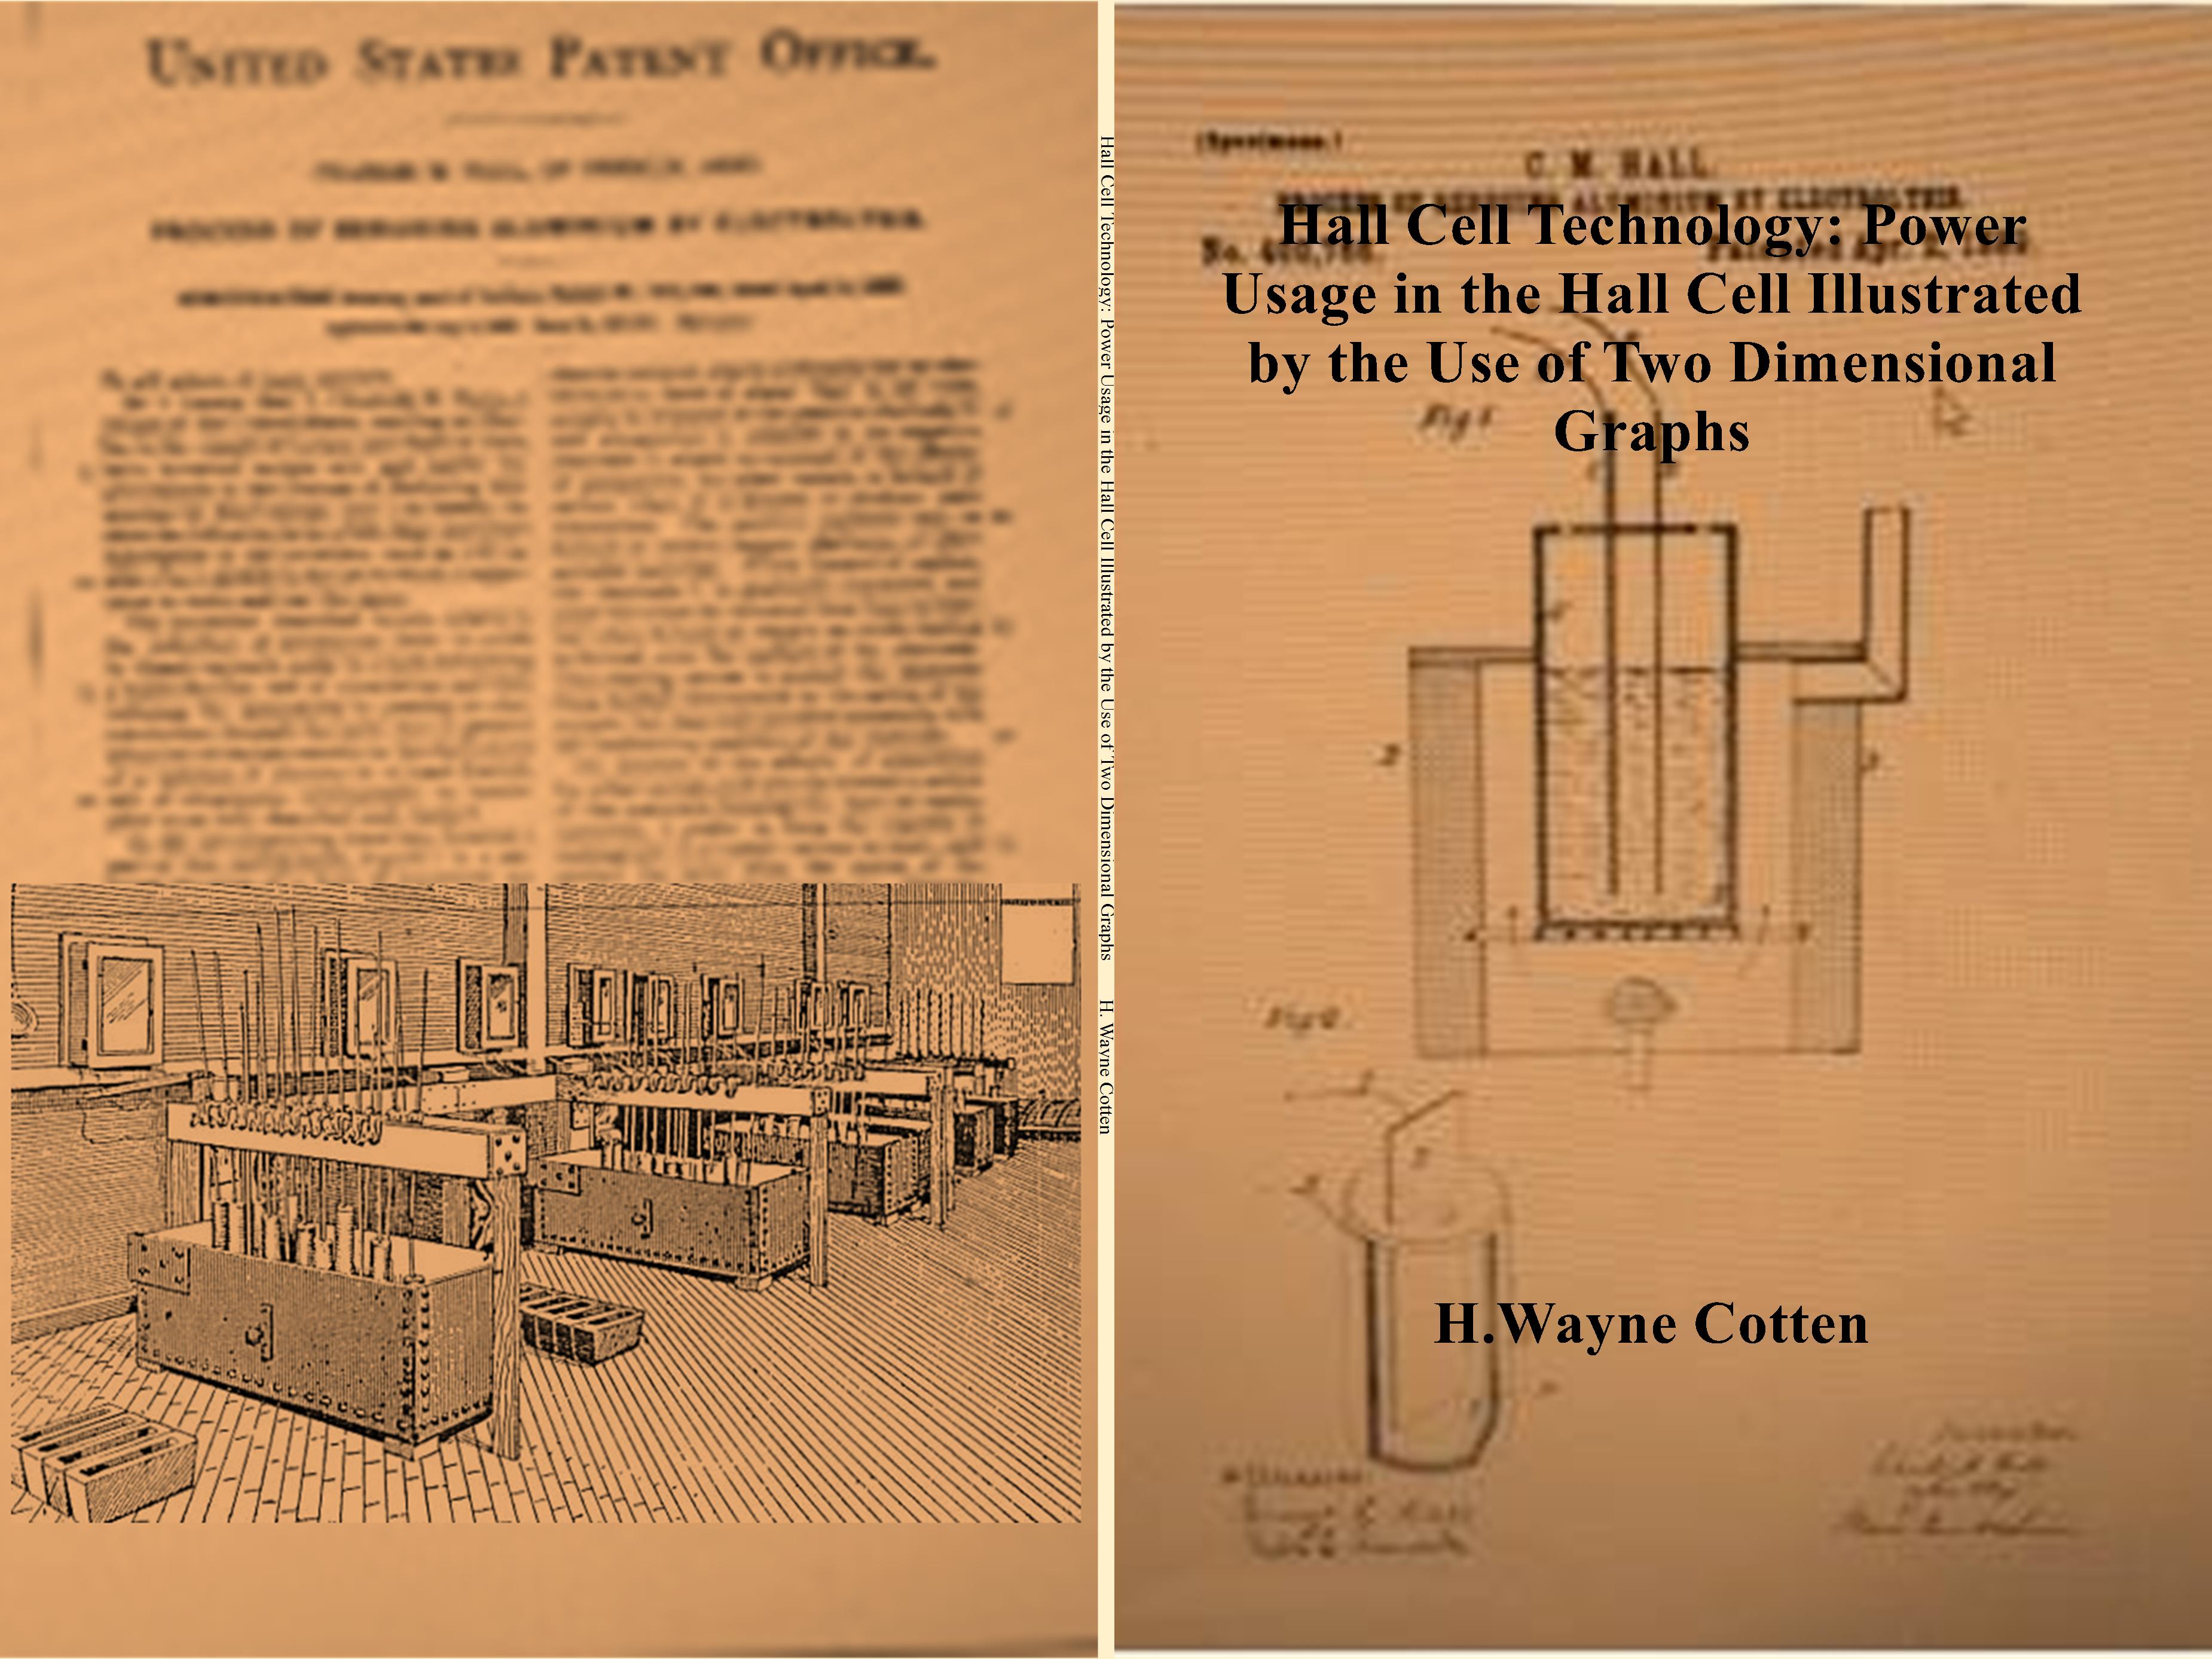 Hall Cell Technology: Power Usage in the Hall Cell Illustrated by the Use of Two Dimensional Graphs cover image